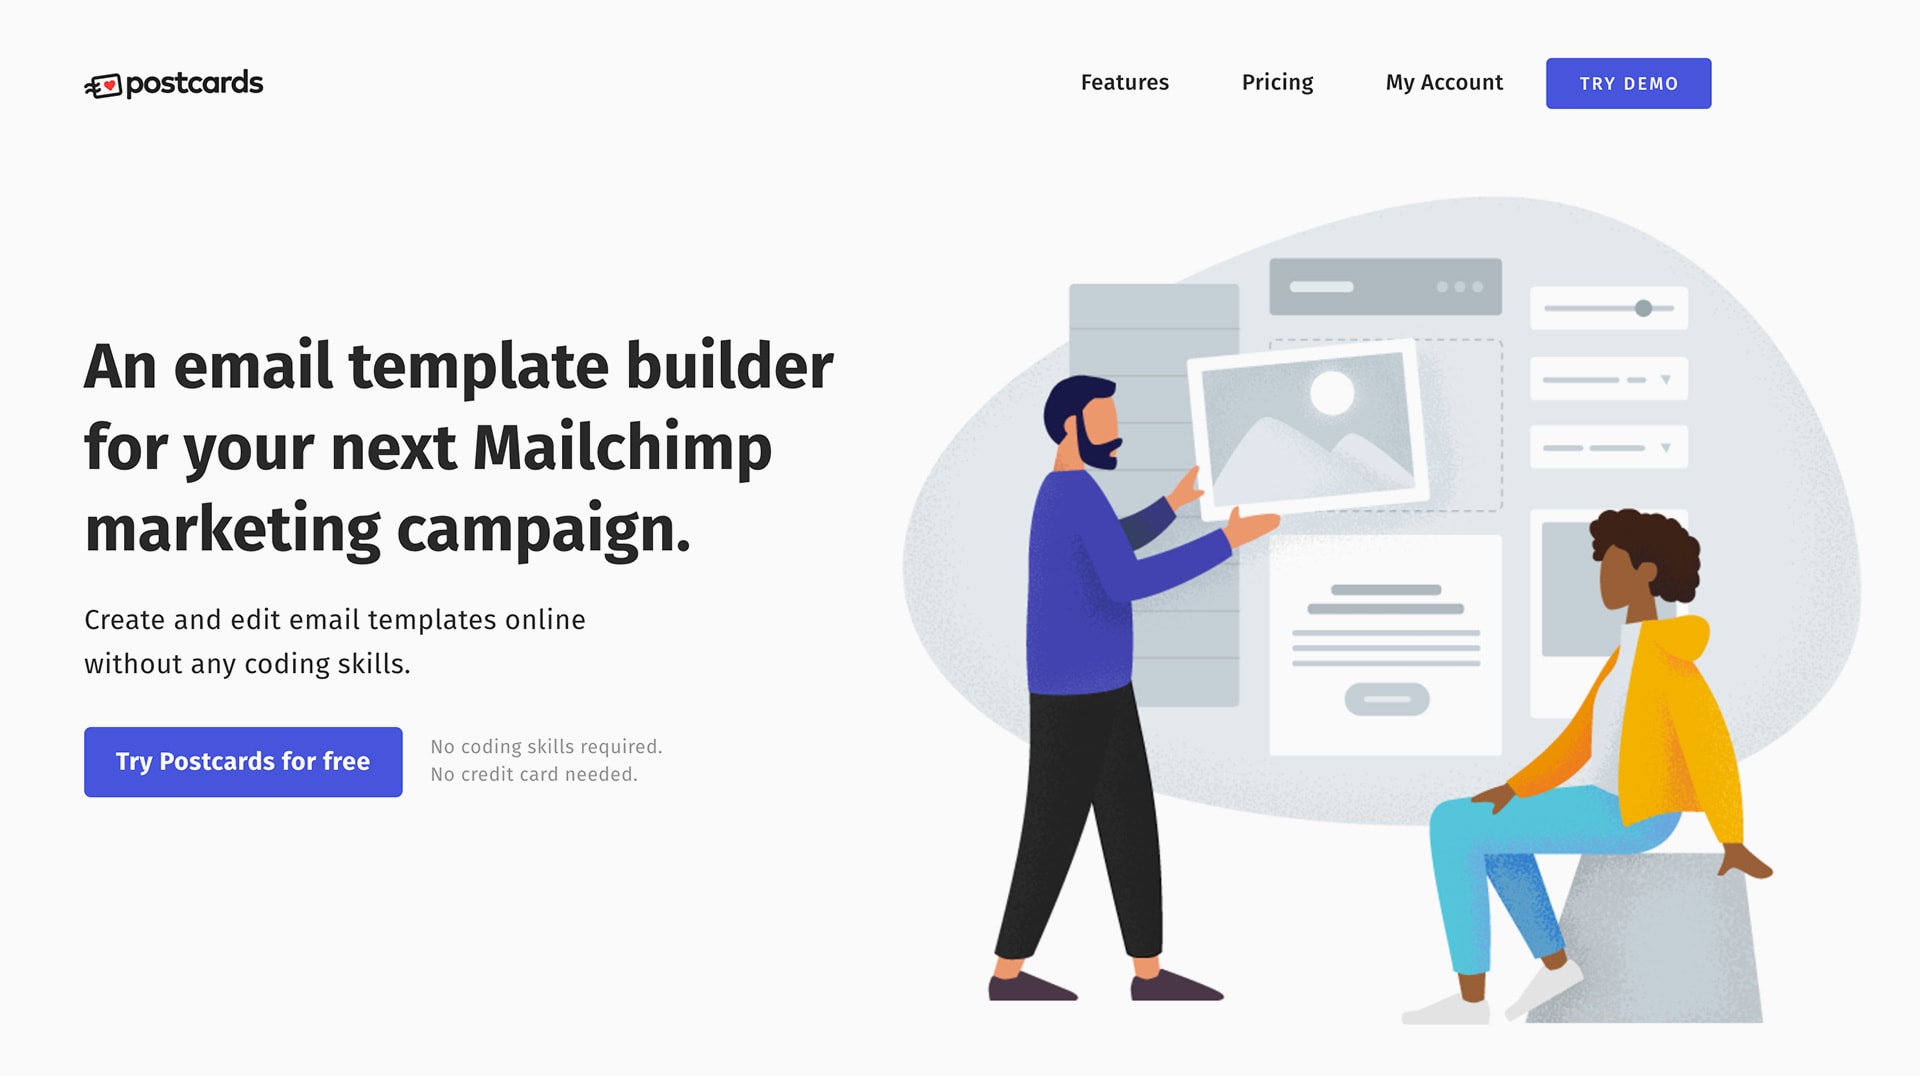 Email template builder